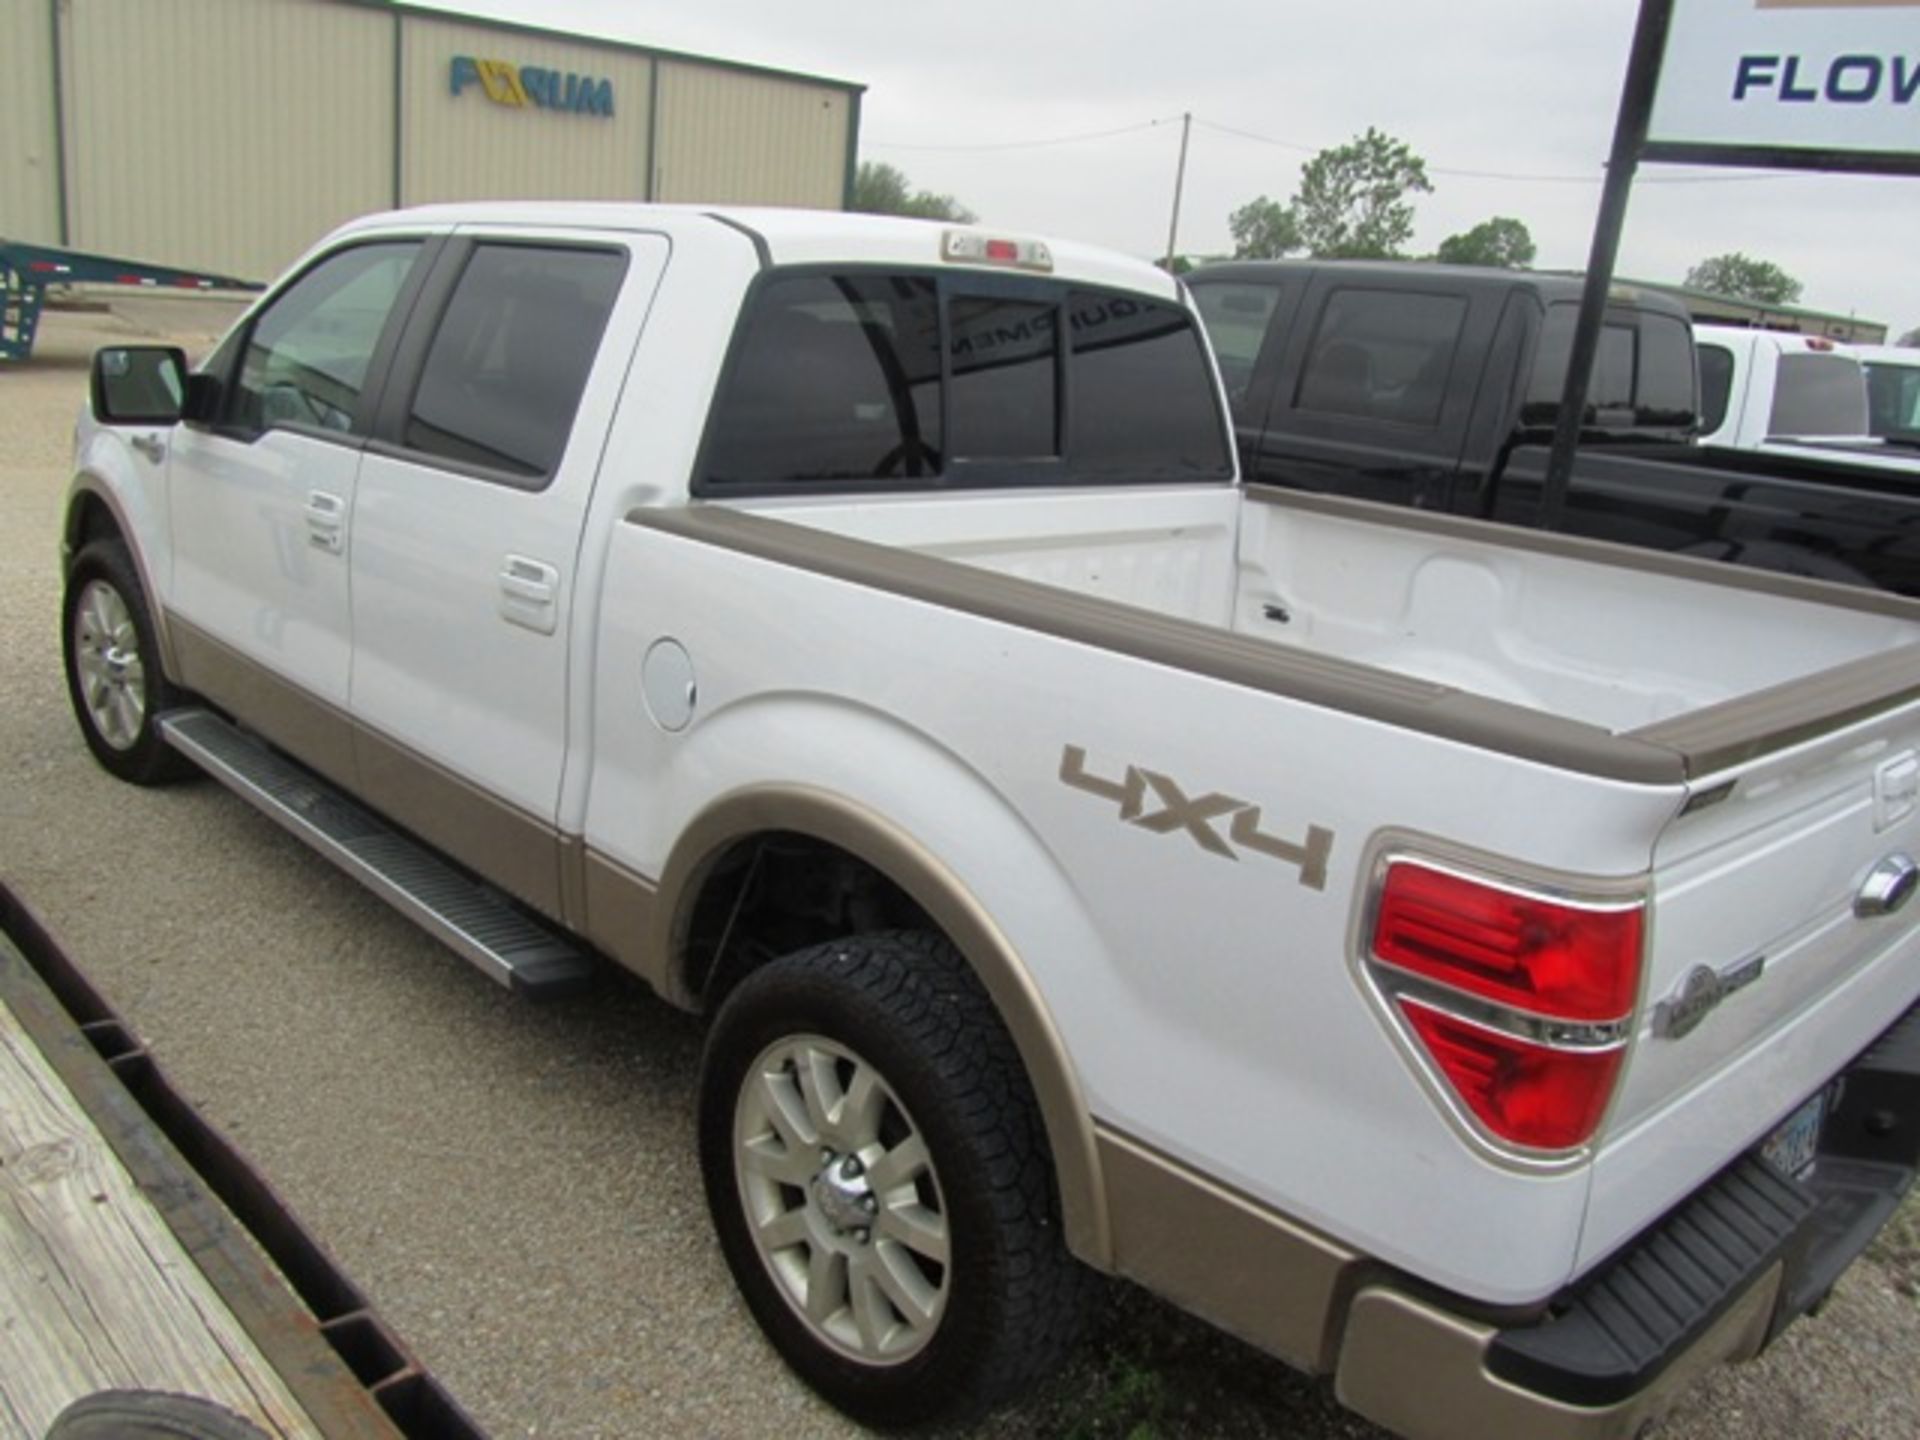 Ford F150 4X4 King Ranch Pick-Up Truck - Image 3 of 4